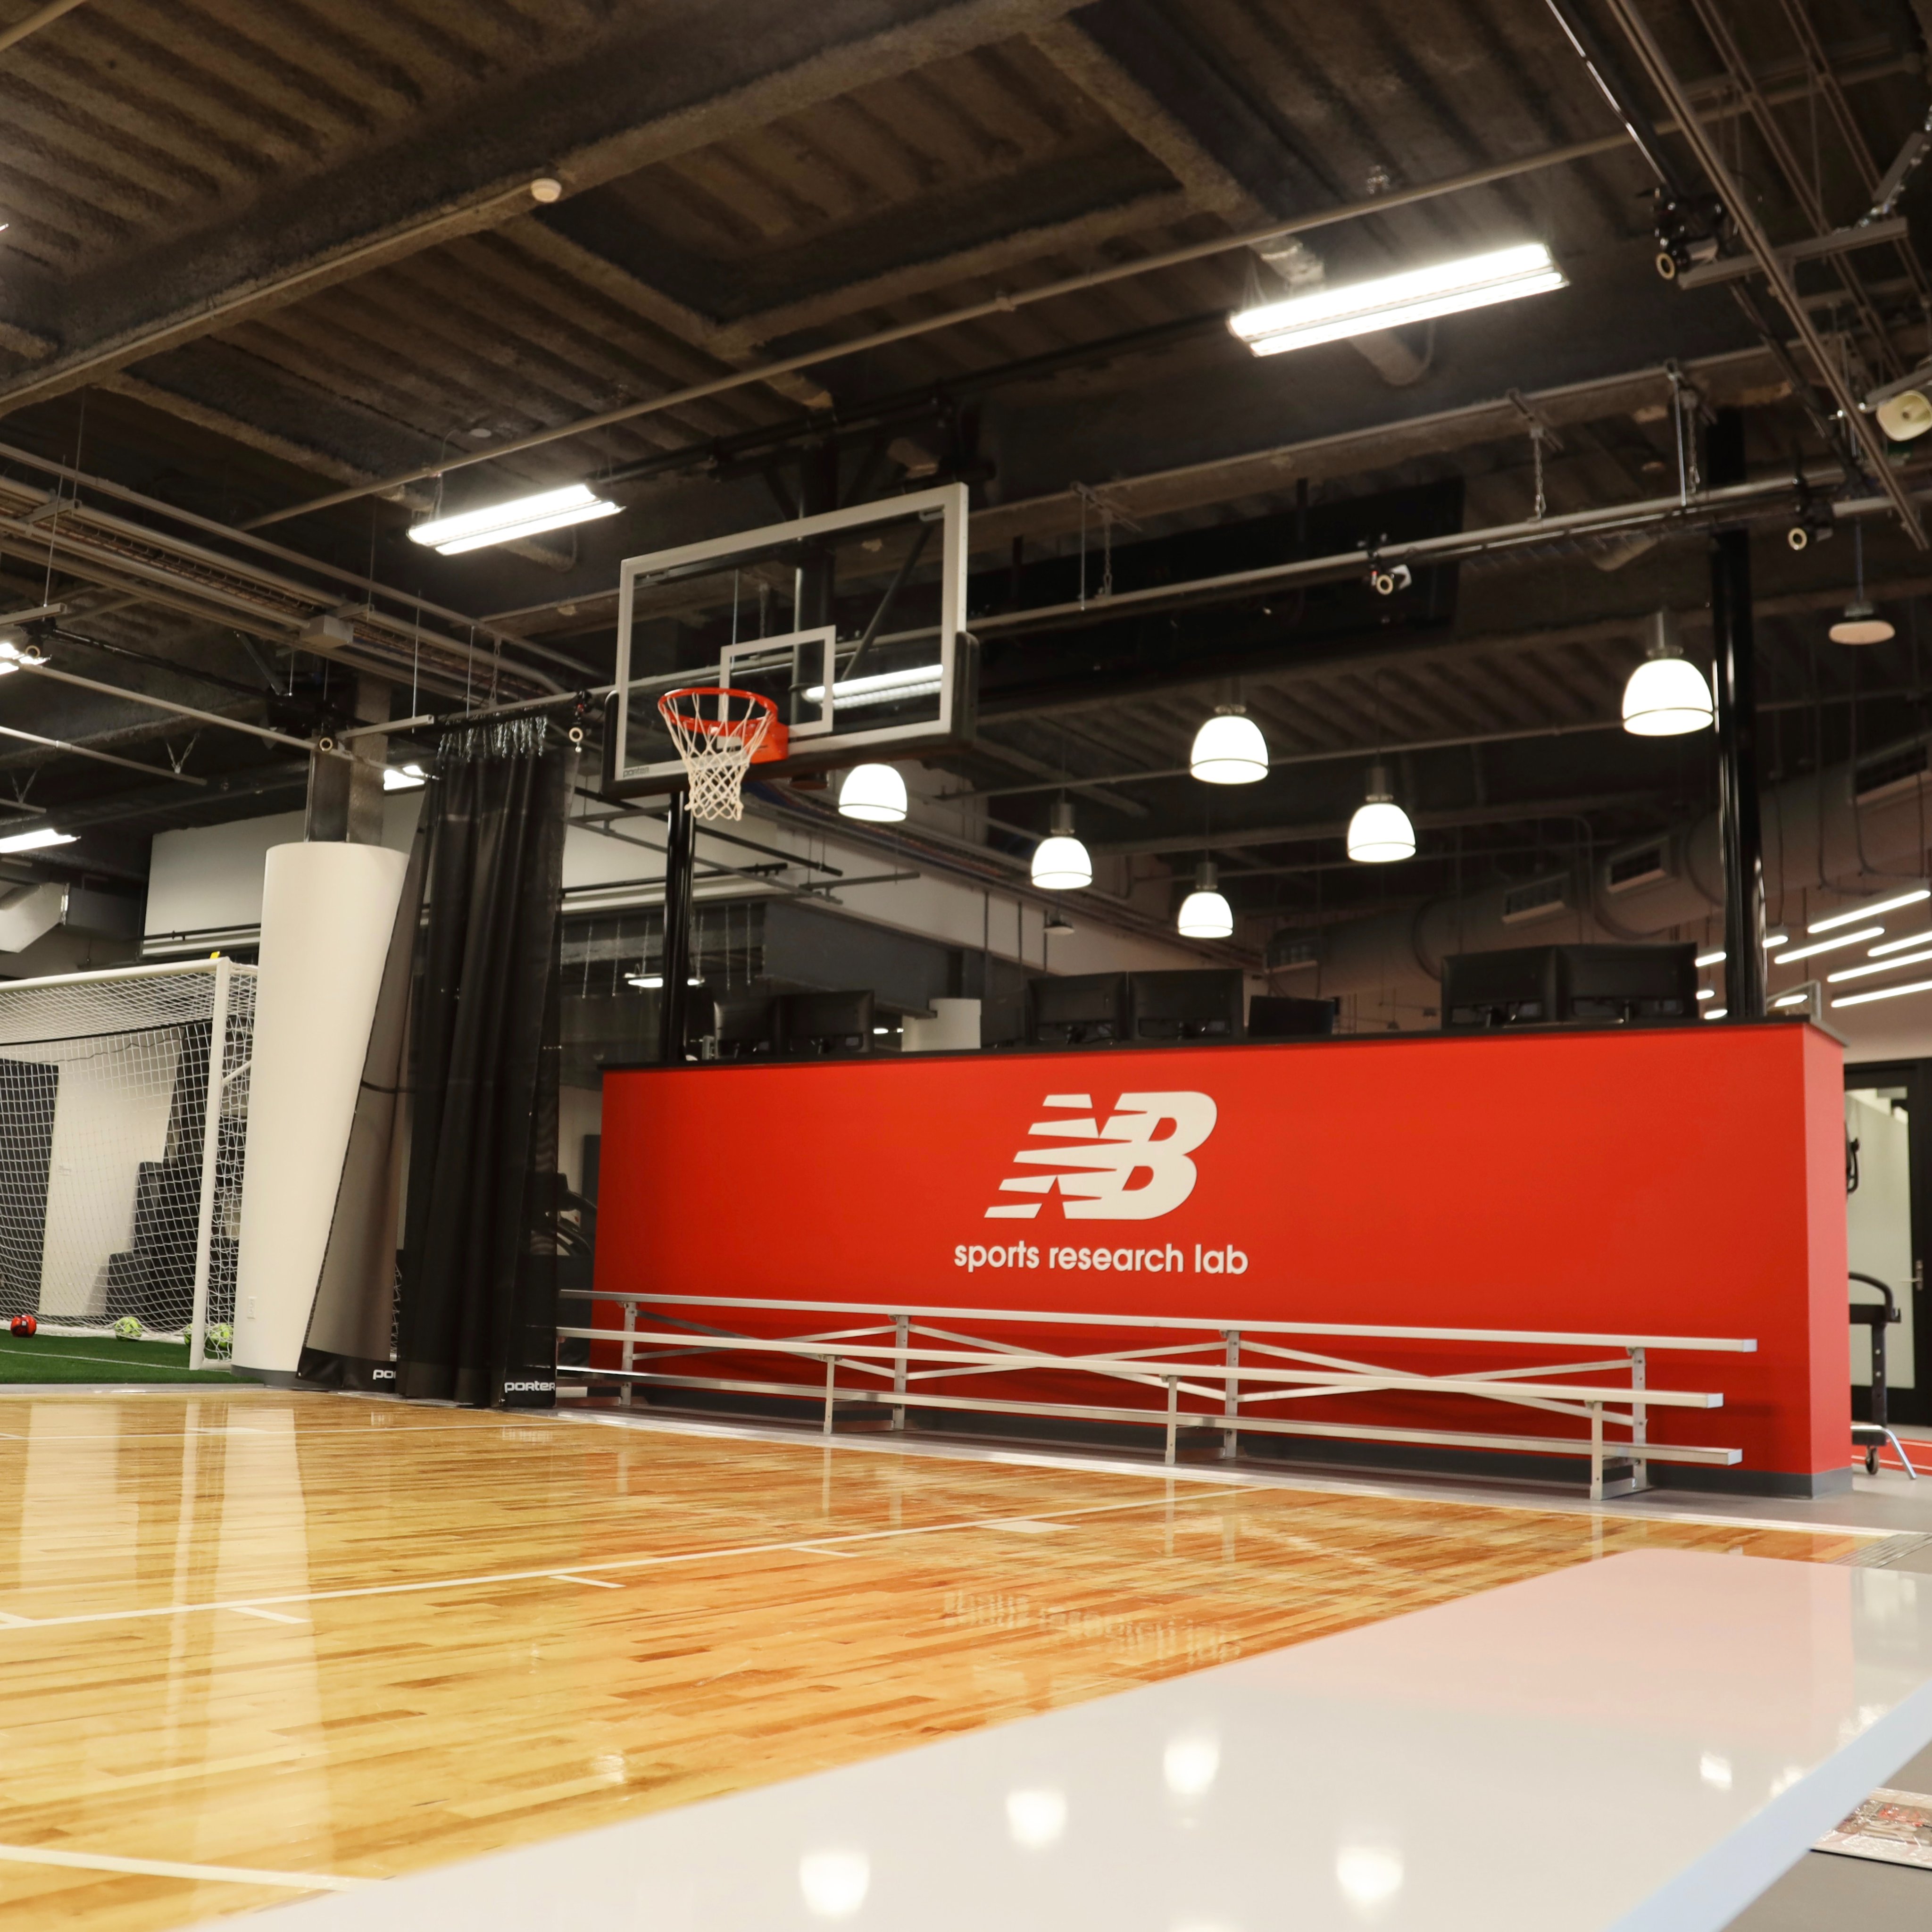 Certificado solo diario New Balance on Twitter: "The New Balance Sports Research Lab. 19,000 square  feet dedicated to driving innovation and technology with our athletes and  products. https://t.co/xKKavbhEAf" / Twitter